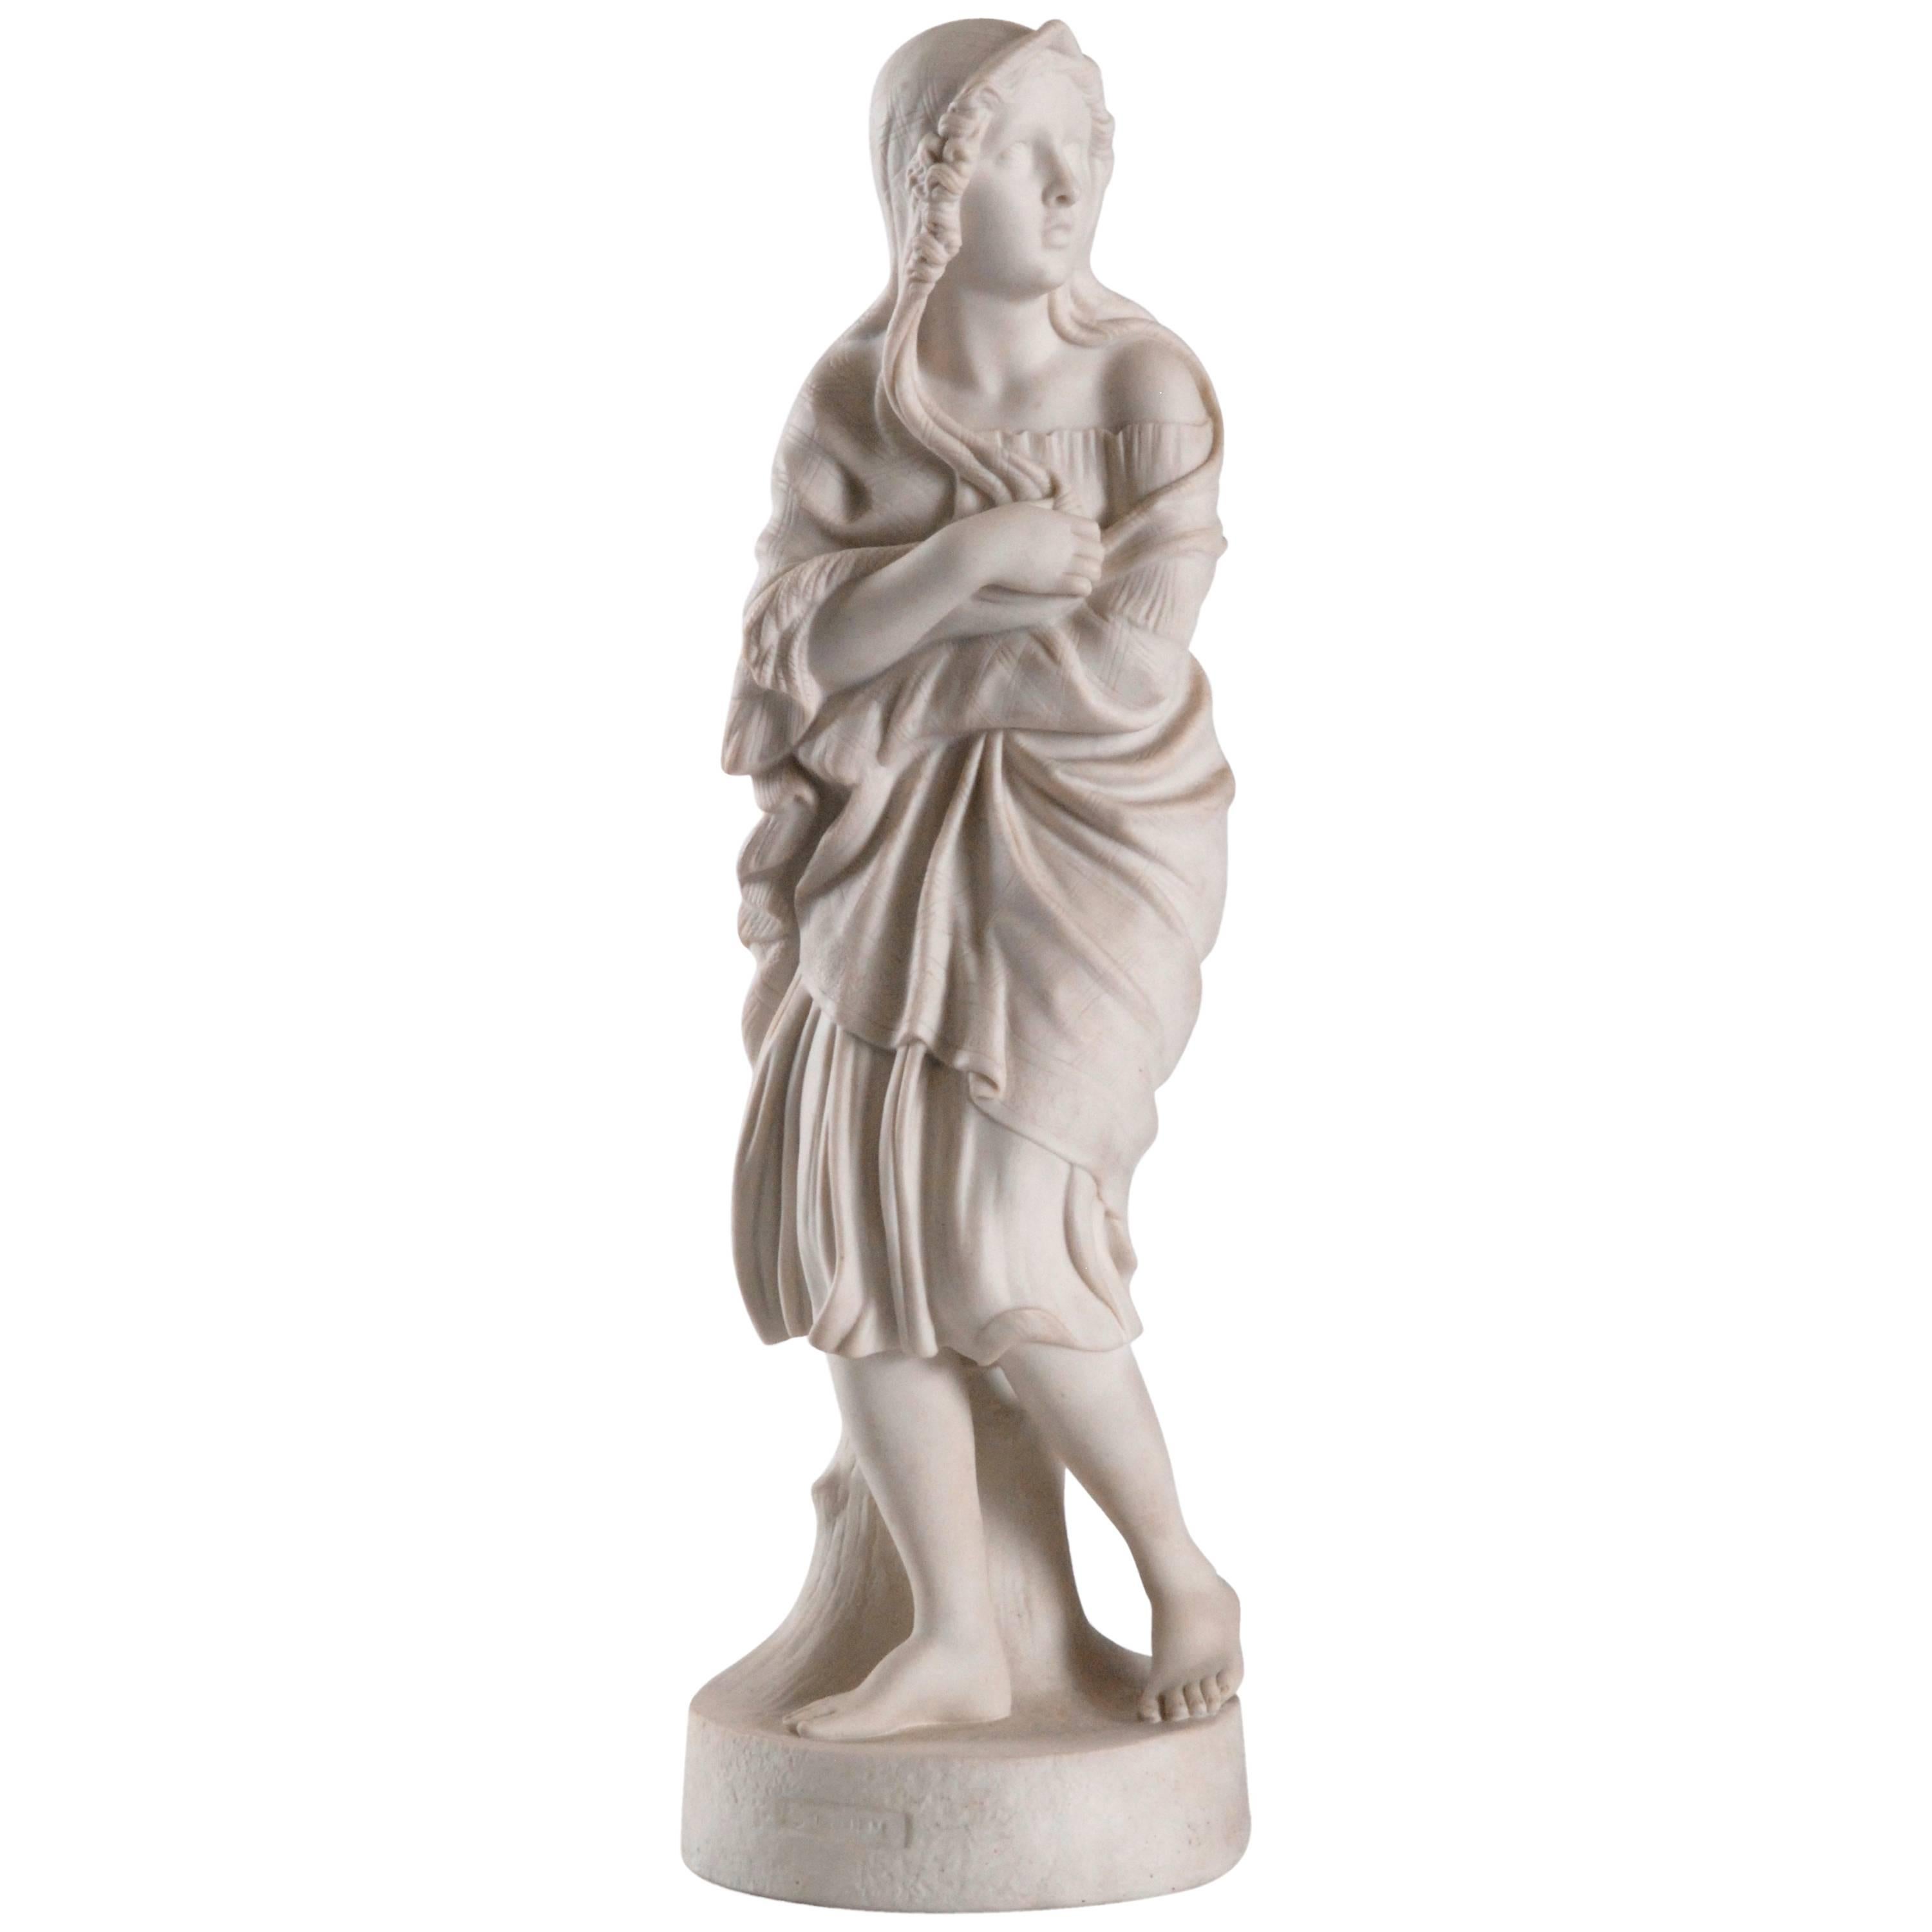 19th Century Copeland Parian Statue, 'Storm' by William Brodie, circa 1858 For Sale